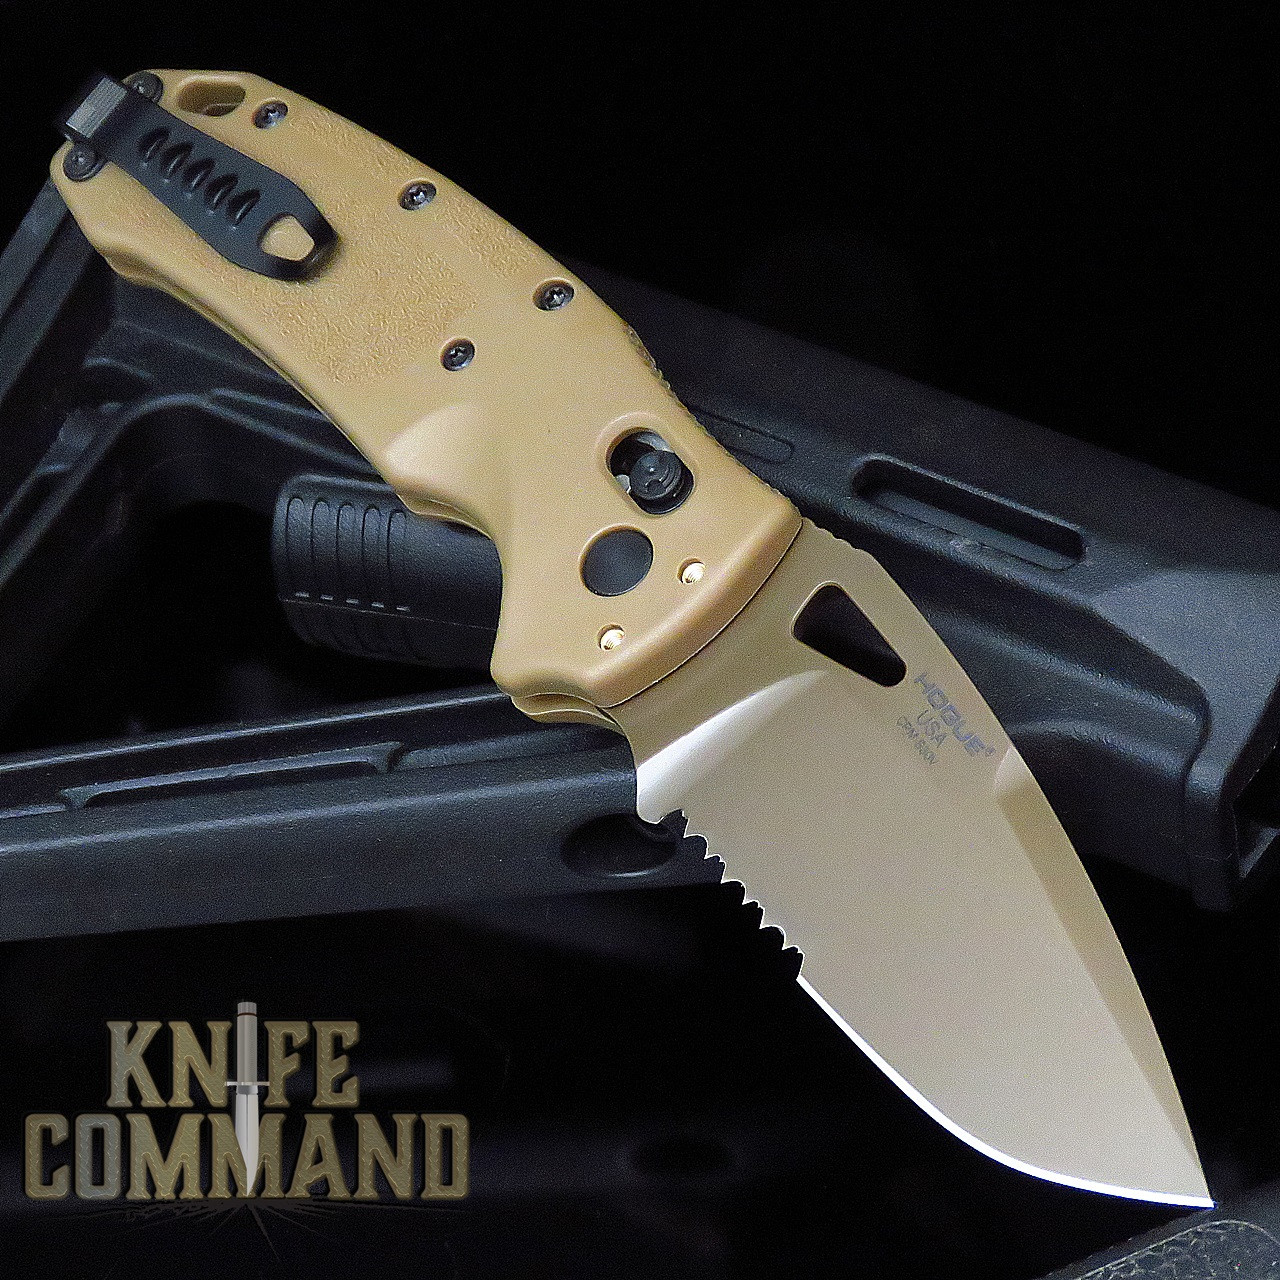 Hogue Knives Sig Sauer K320A M17 Coyote Tan ABLE Lock Manual Folder 3.5" Drop Point Blade - Coyote PVD Finish, Poly Frame Knife 36373